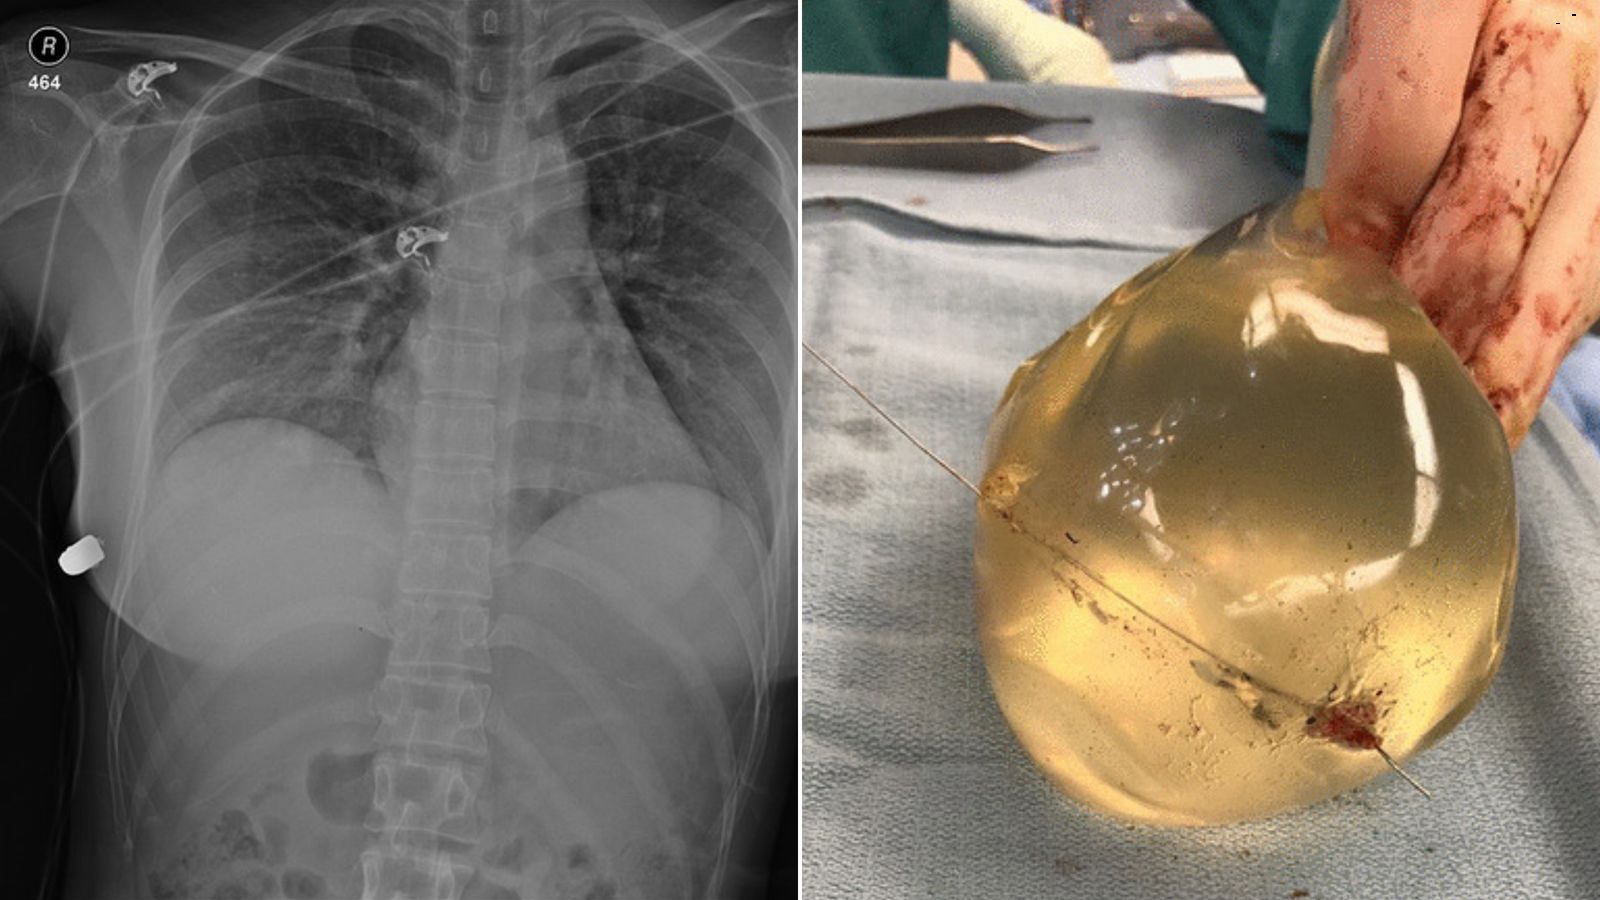 Mum BURST her own breast implants with enormous needle used for